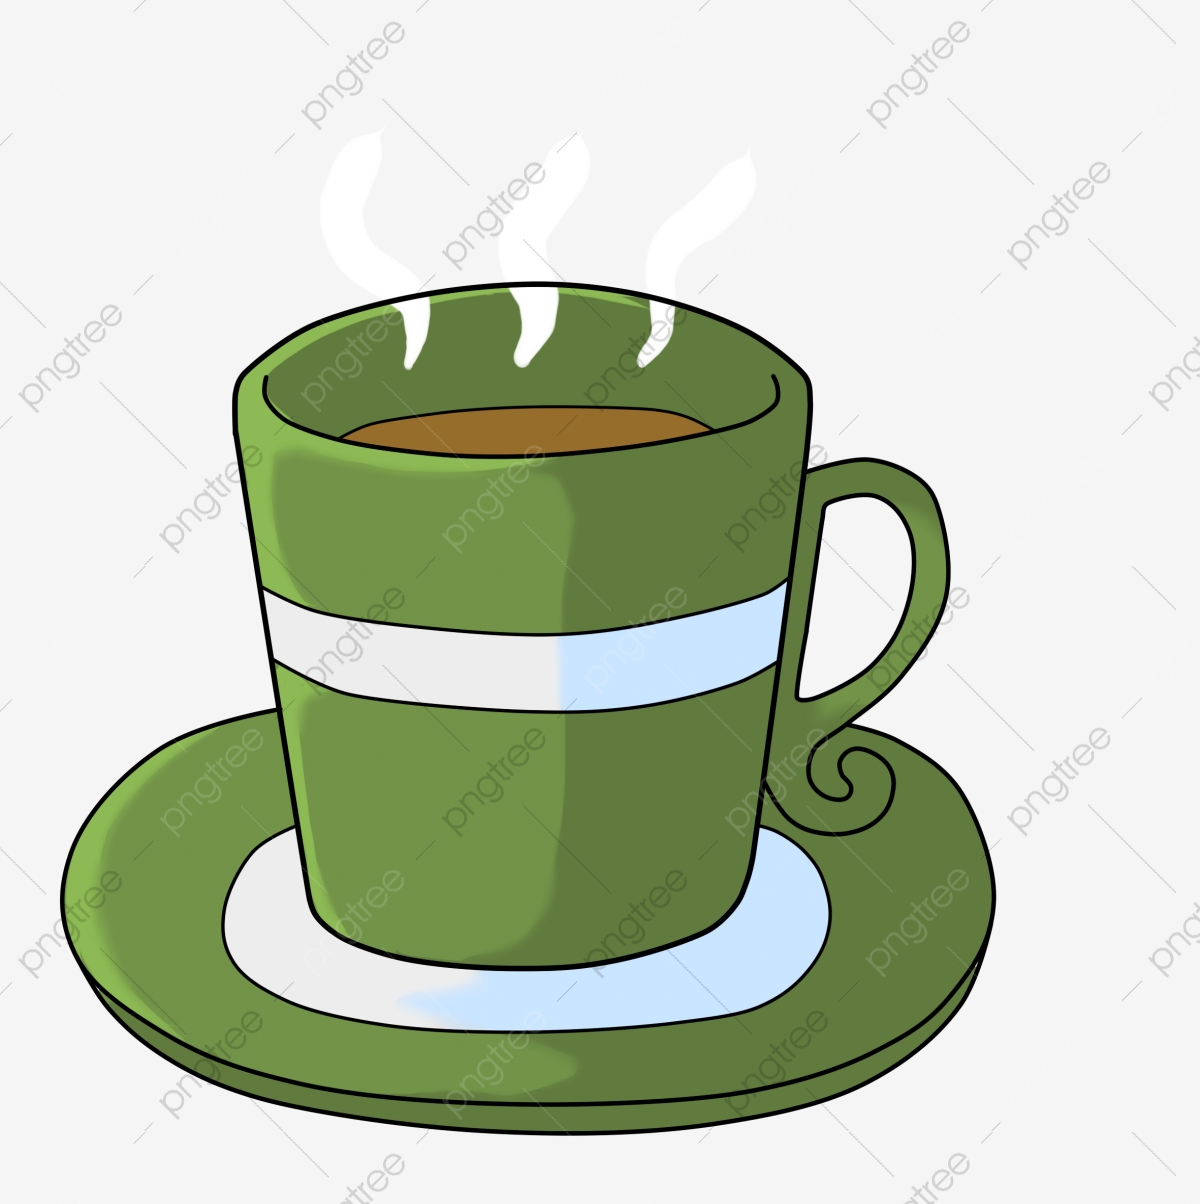 Cup green teacup coffee. Plate clipart tea plate